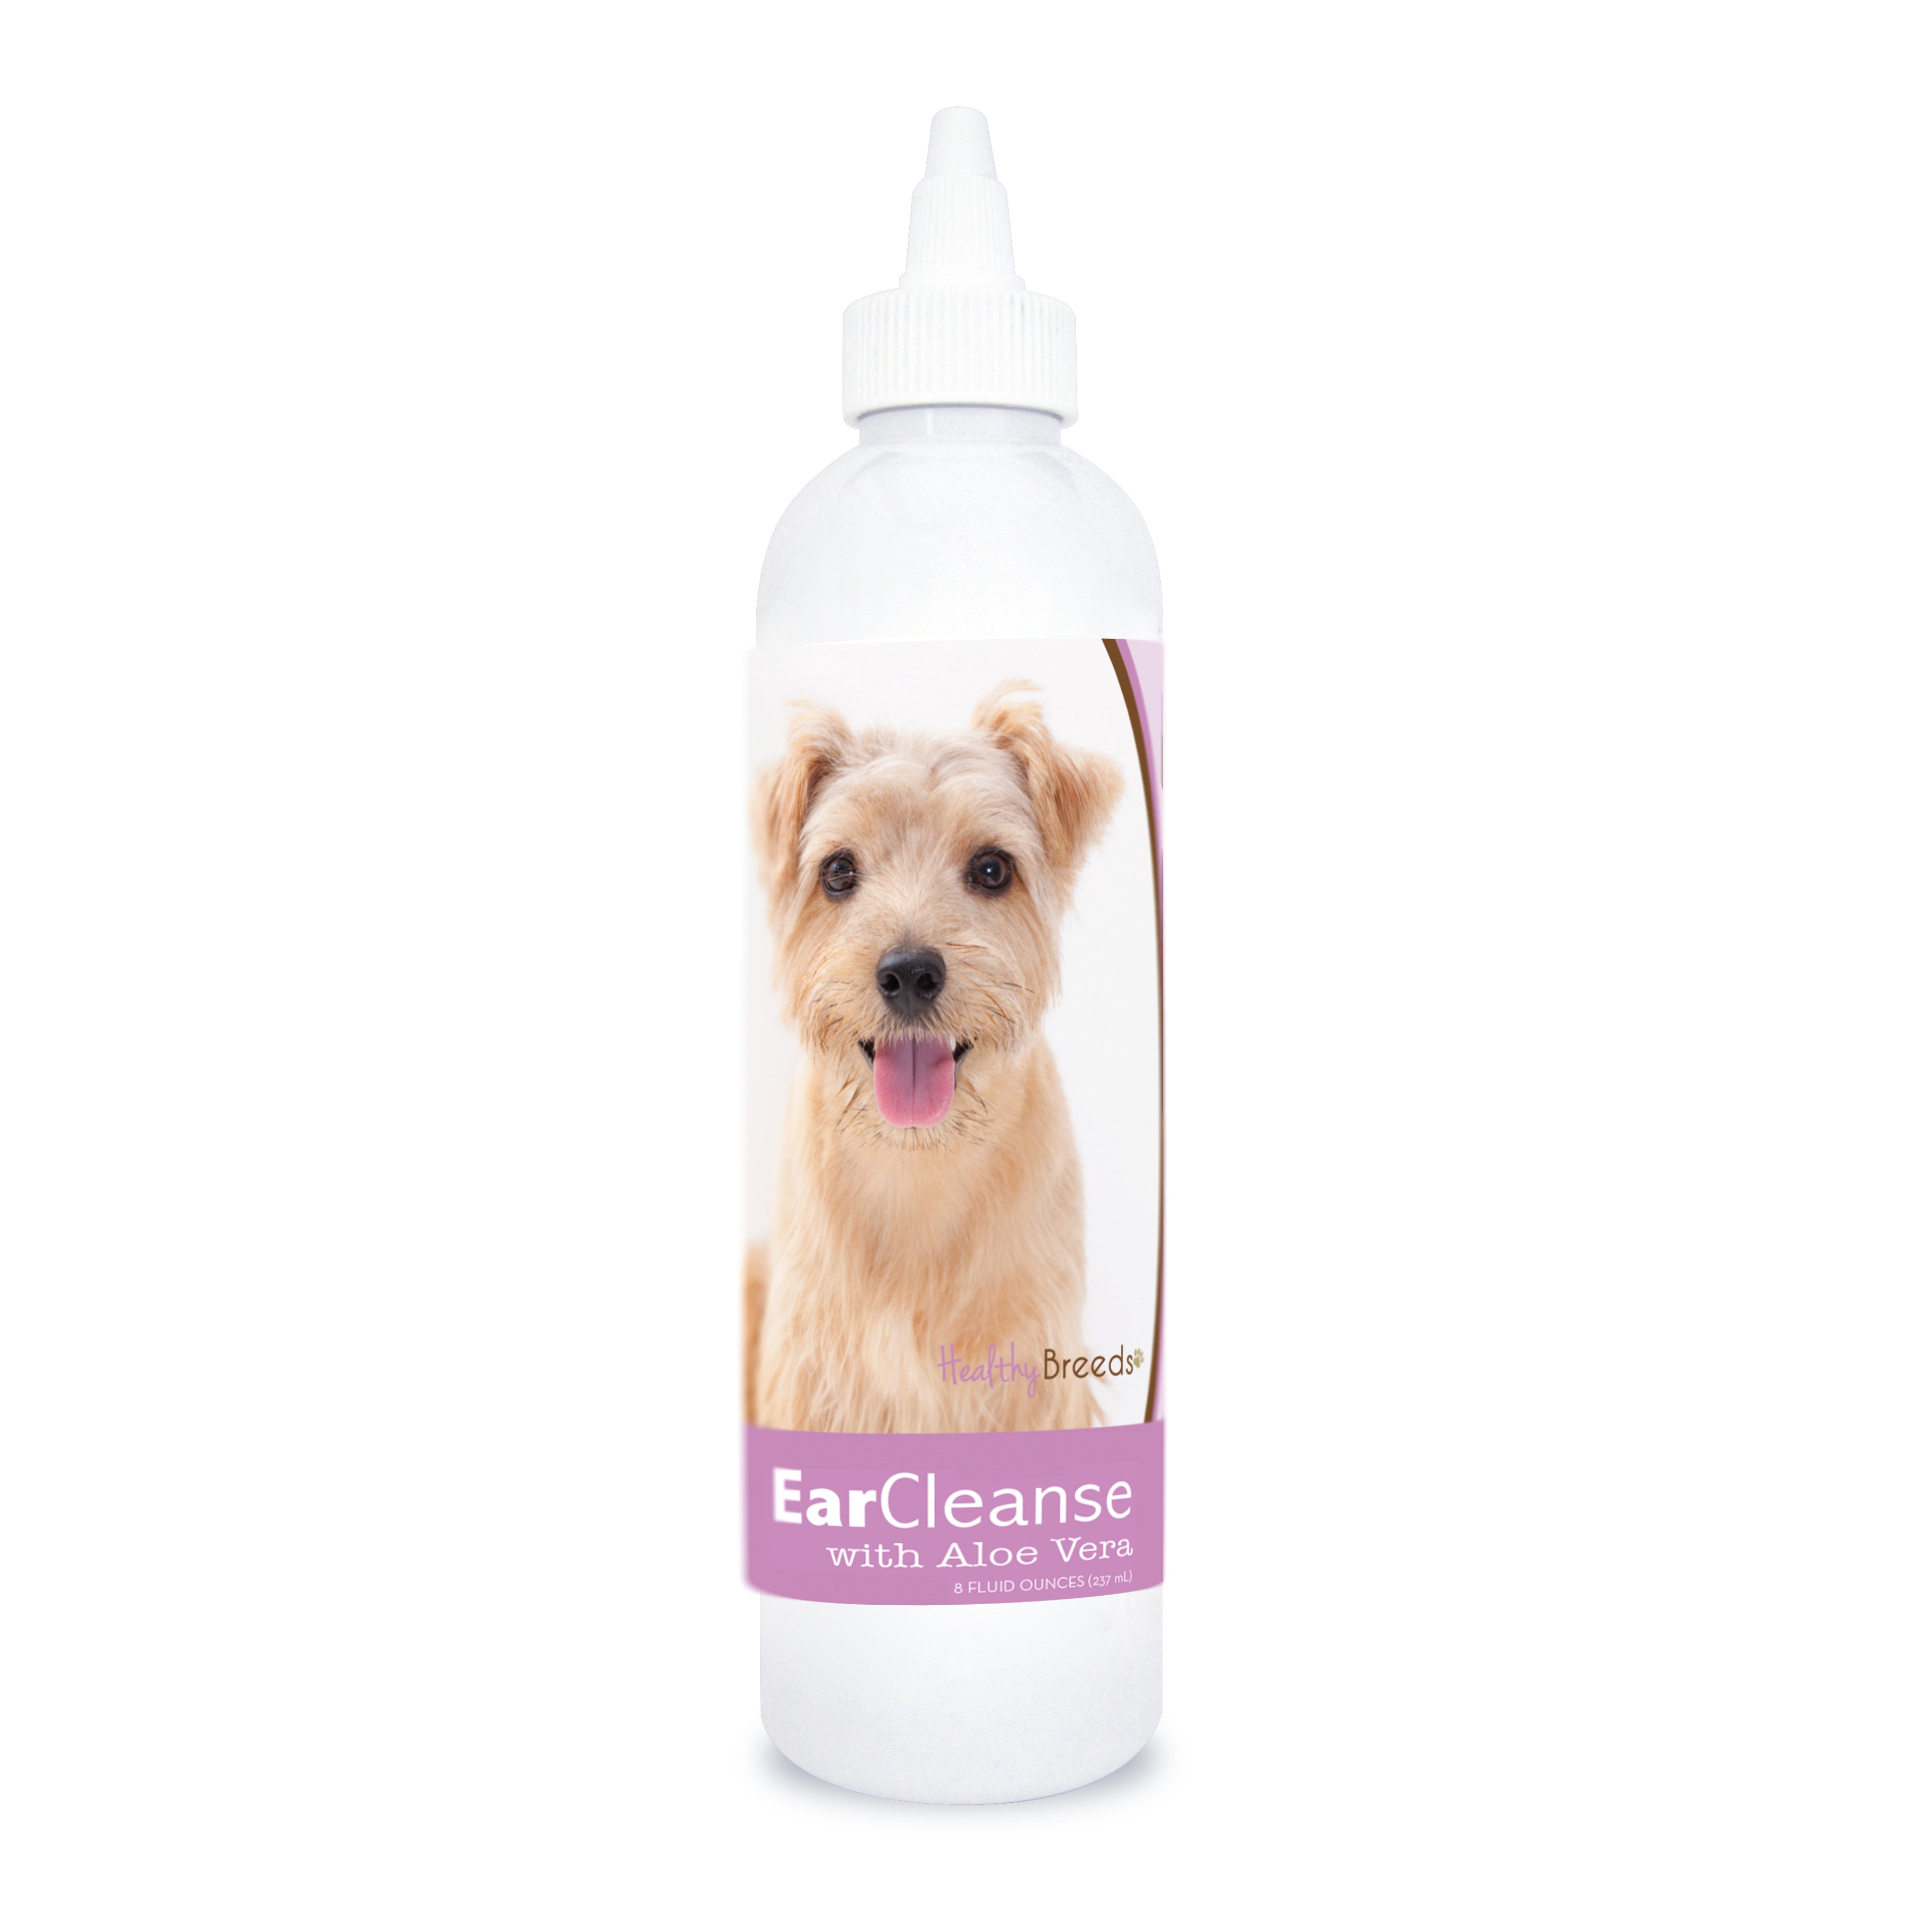 Norfolk Terrier Ear Cleanse with Aloe Vera Sweet Pea and Vanilla 8 oz